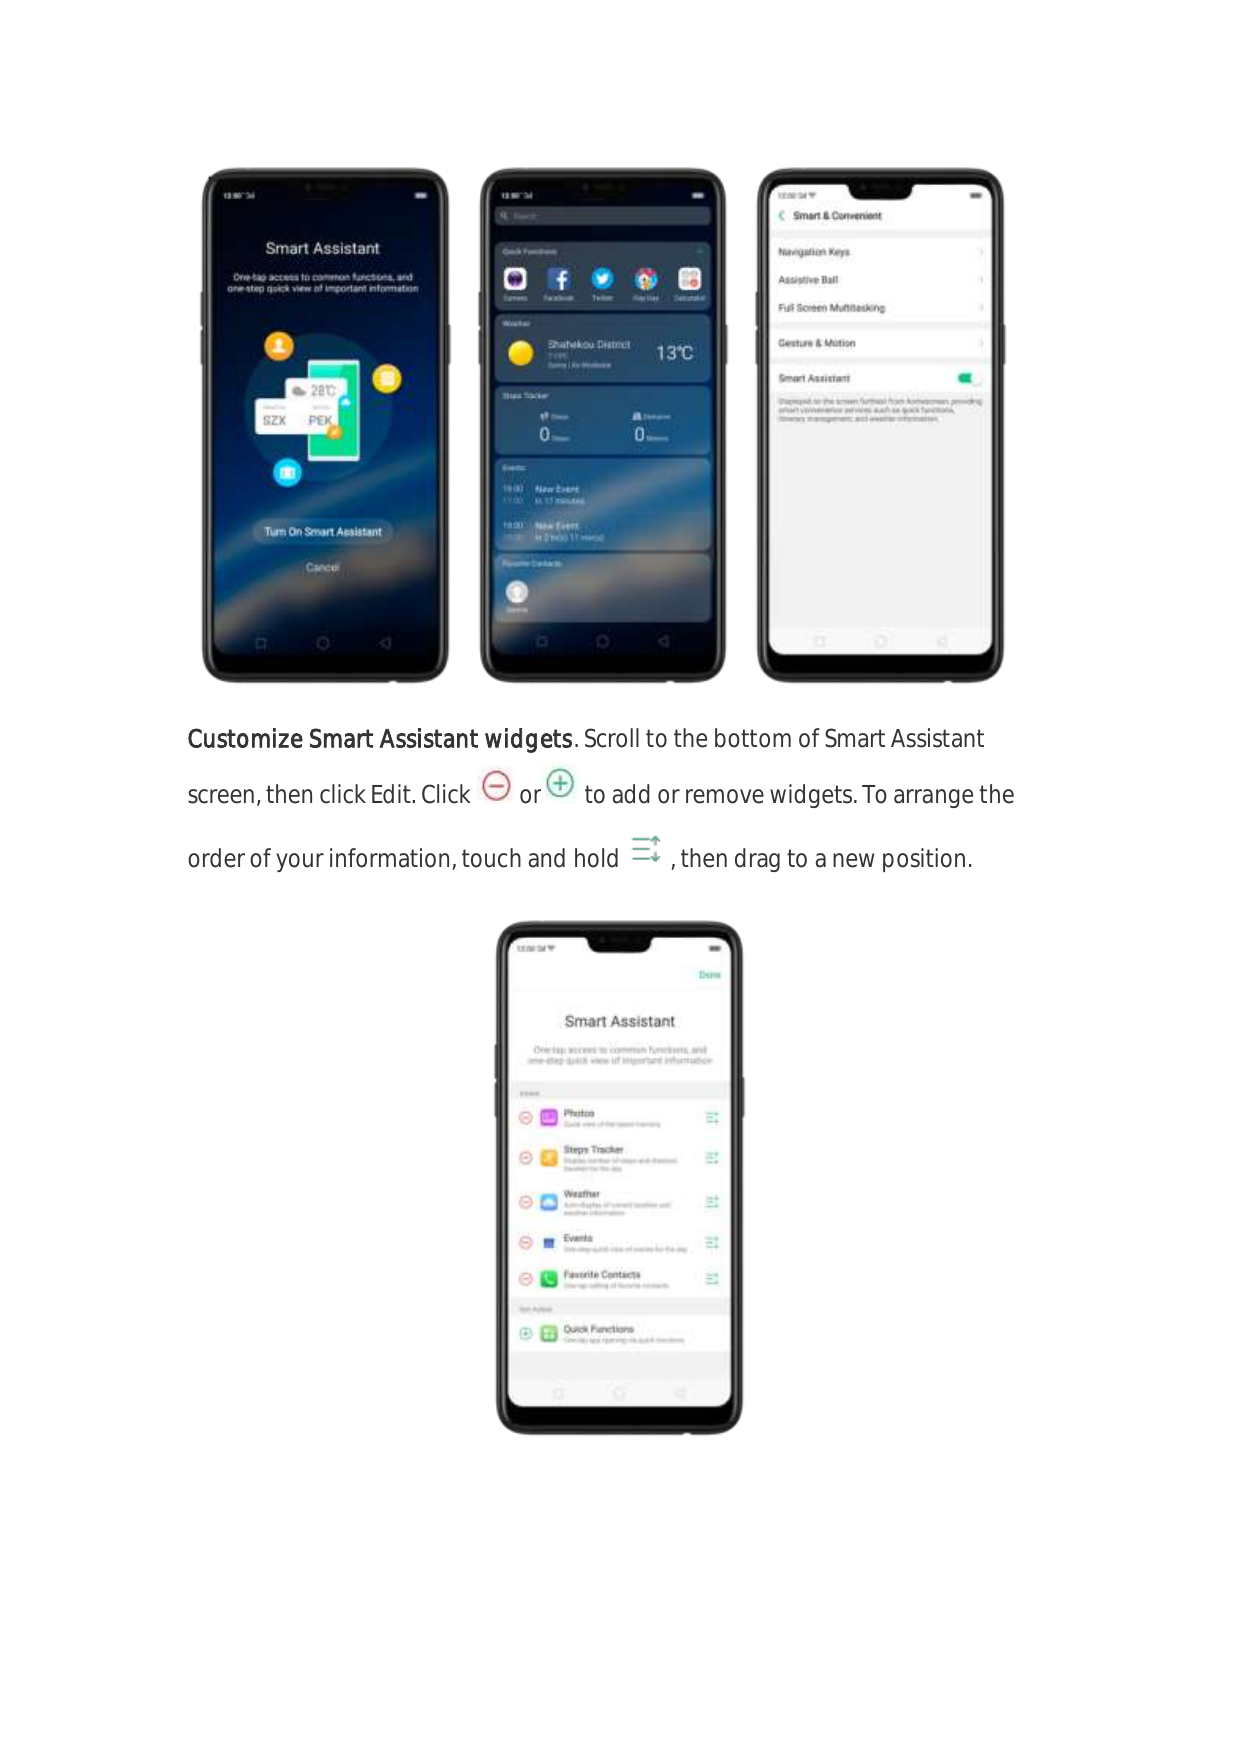 Customize Smart Assistant widgets. Scroll to the bottom of Smart Assistantscreen, then click Edit. Clickorto add or remove widge